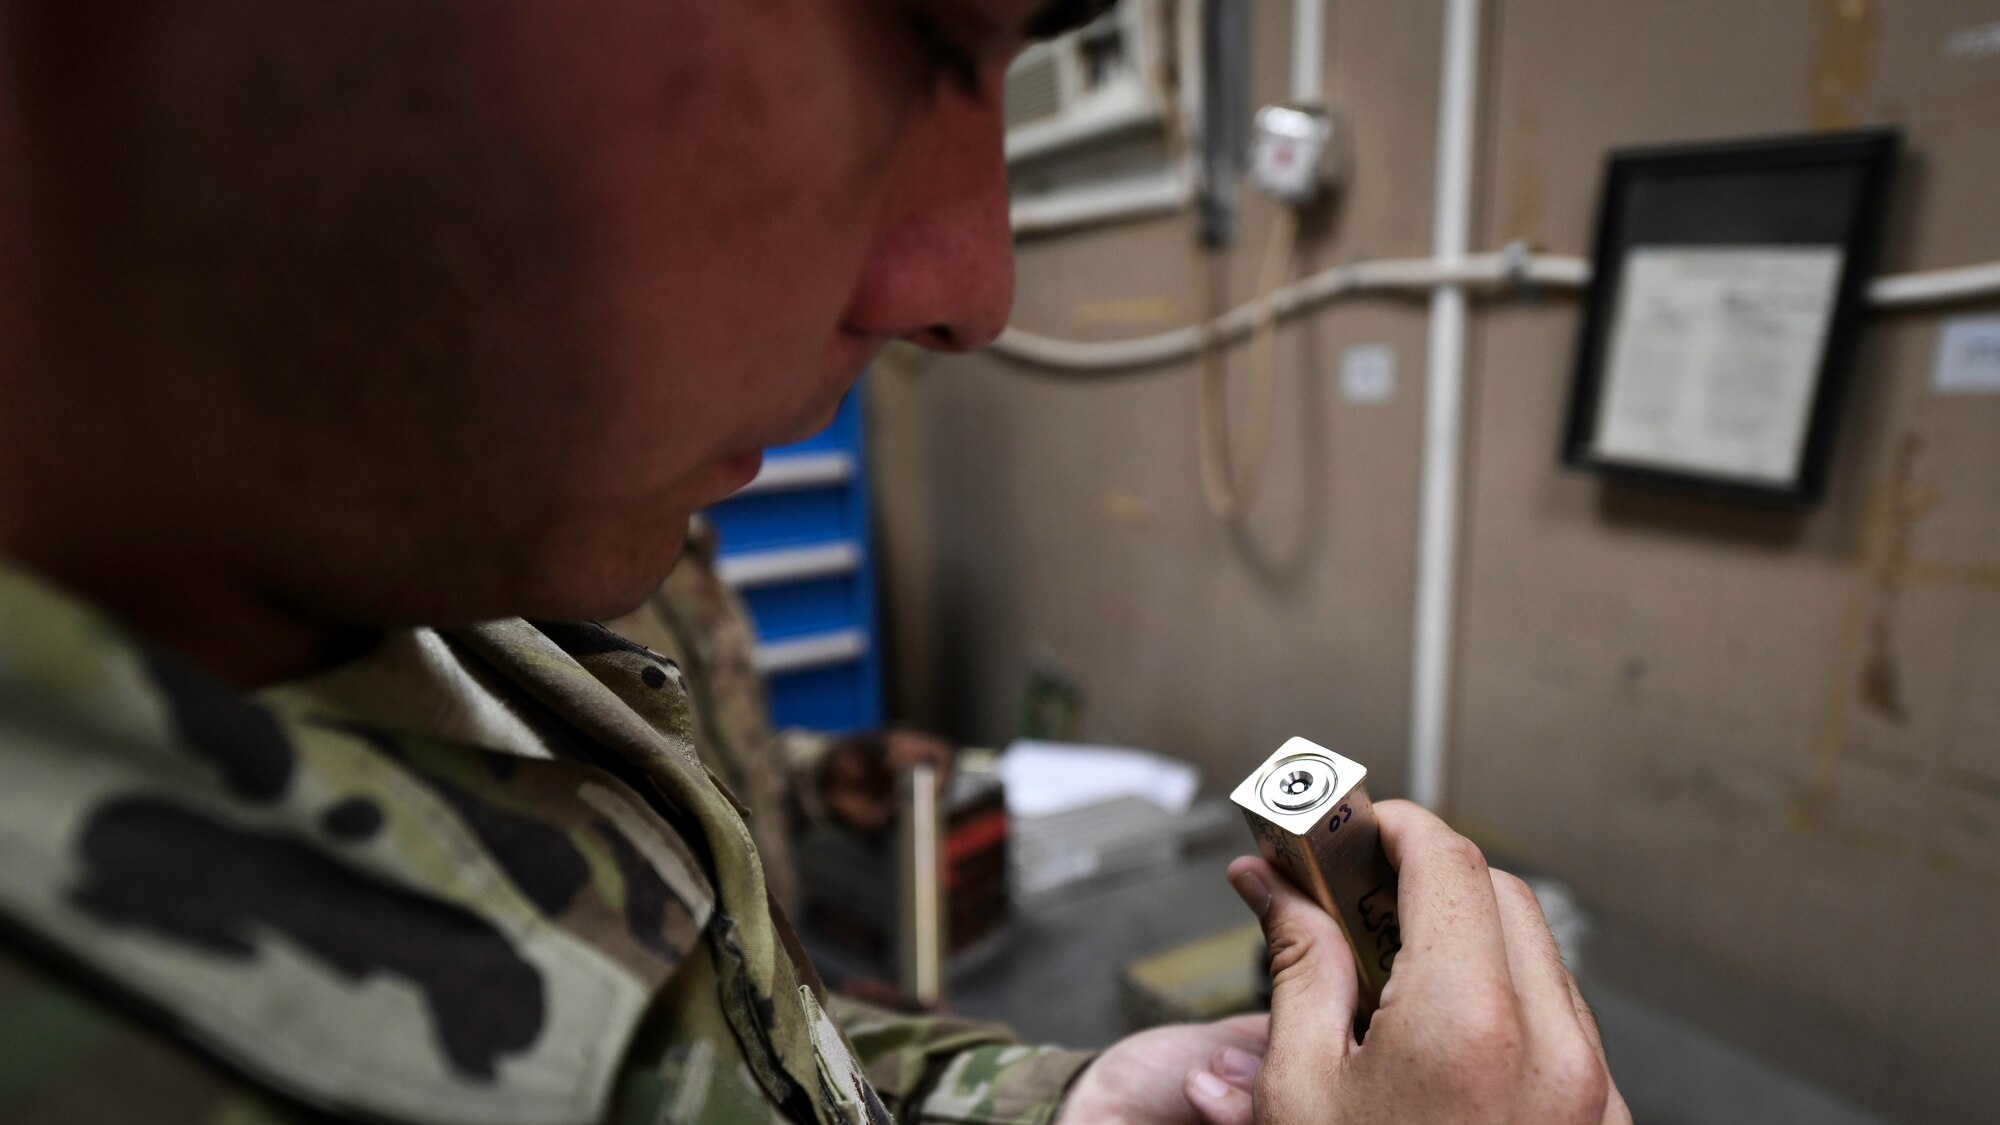 U.S. Air Force Airman 1st Class Conner Quintana, 386th Expeditionary Maintenance Squadron munitions technician journeyman, inspects a flare unit before installing it into a housing module at Ali Al Salem Air Base, Kuwait, July 18, 2019. Flares and chaff are routinely inspected to verify expiration dates, guaranteeing proper functionality in the event countermeasures are needed during operations. (U.S. Air Force photo by Staff. Sgt. Mozer O. Da Cunha)